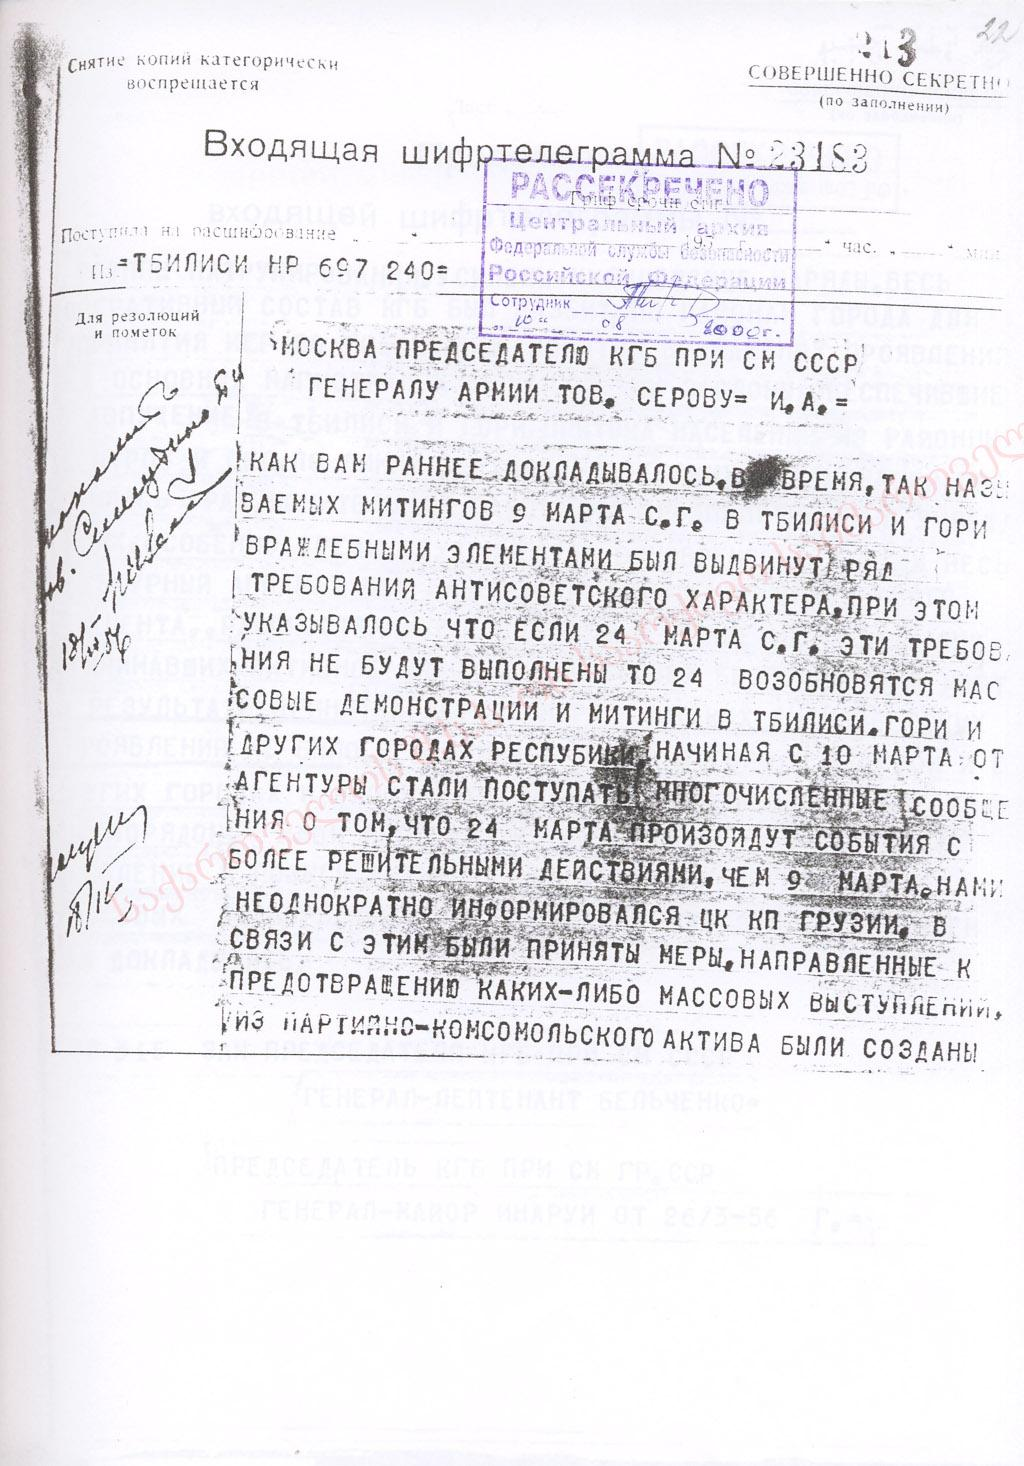 Top Secret informational letter, sent to the Chairman of the Committee for State Security of  USSR, Army General I. Serov tells about measures taken to prevent the planned protest actions in Georgia for March 24th, 1956.  № 23183